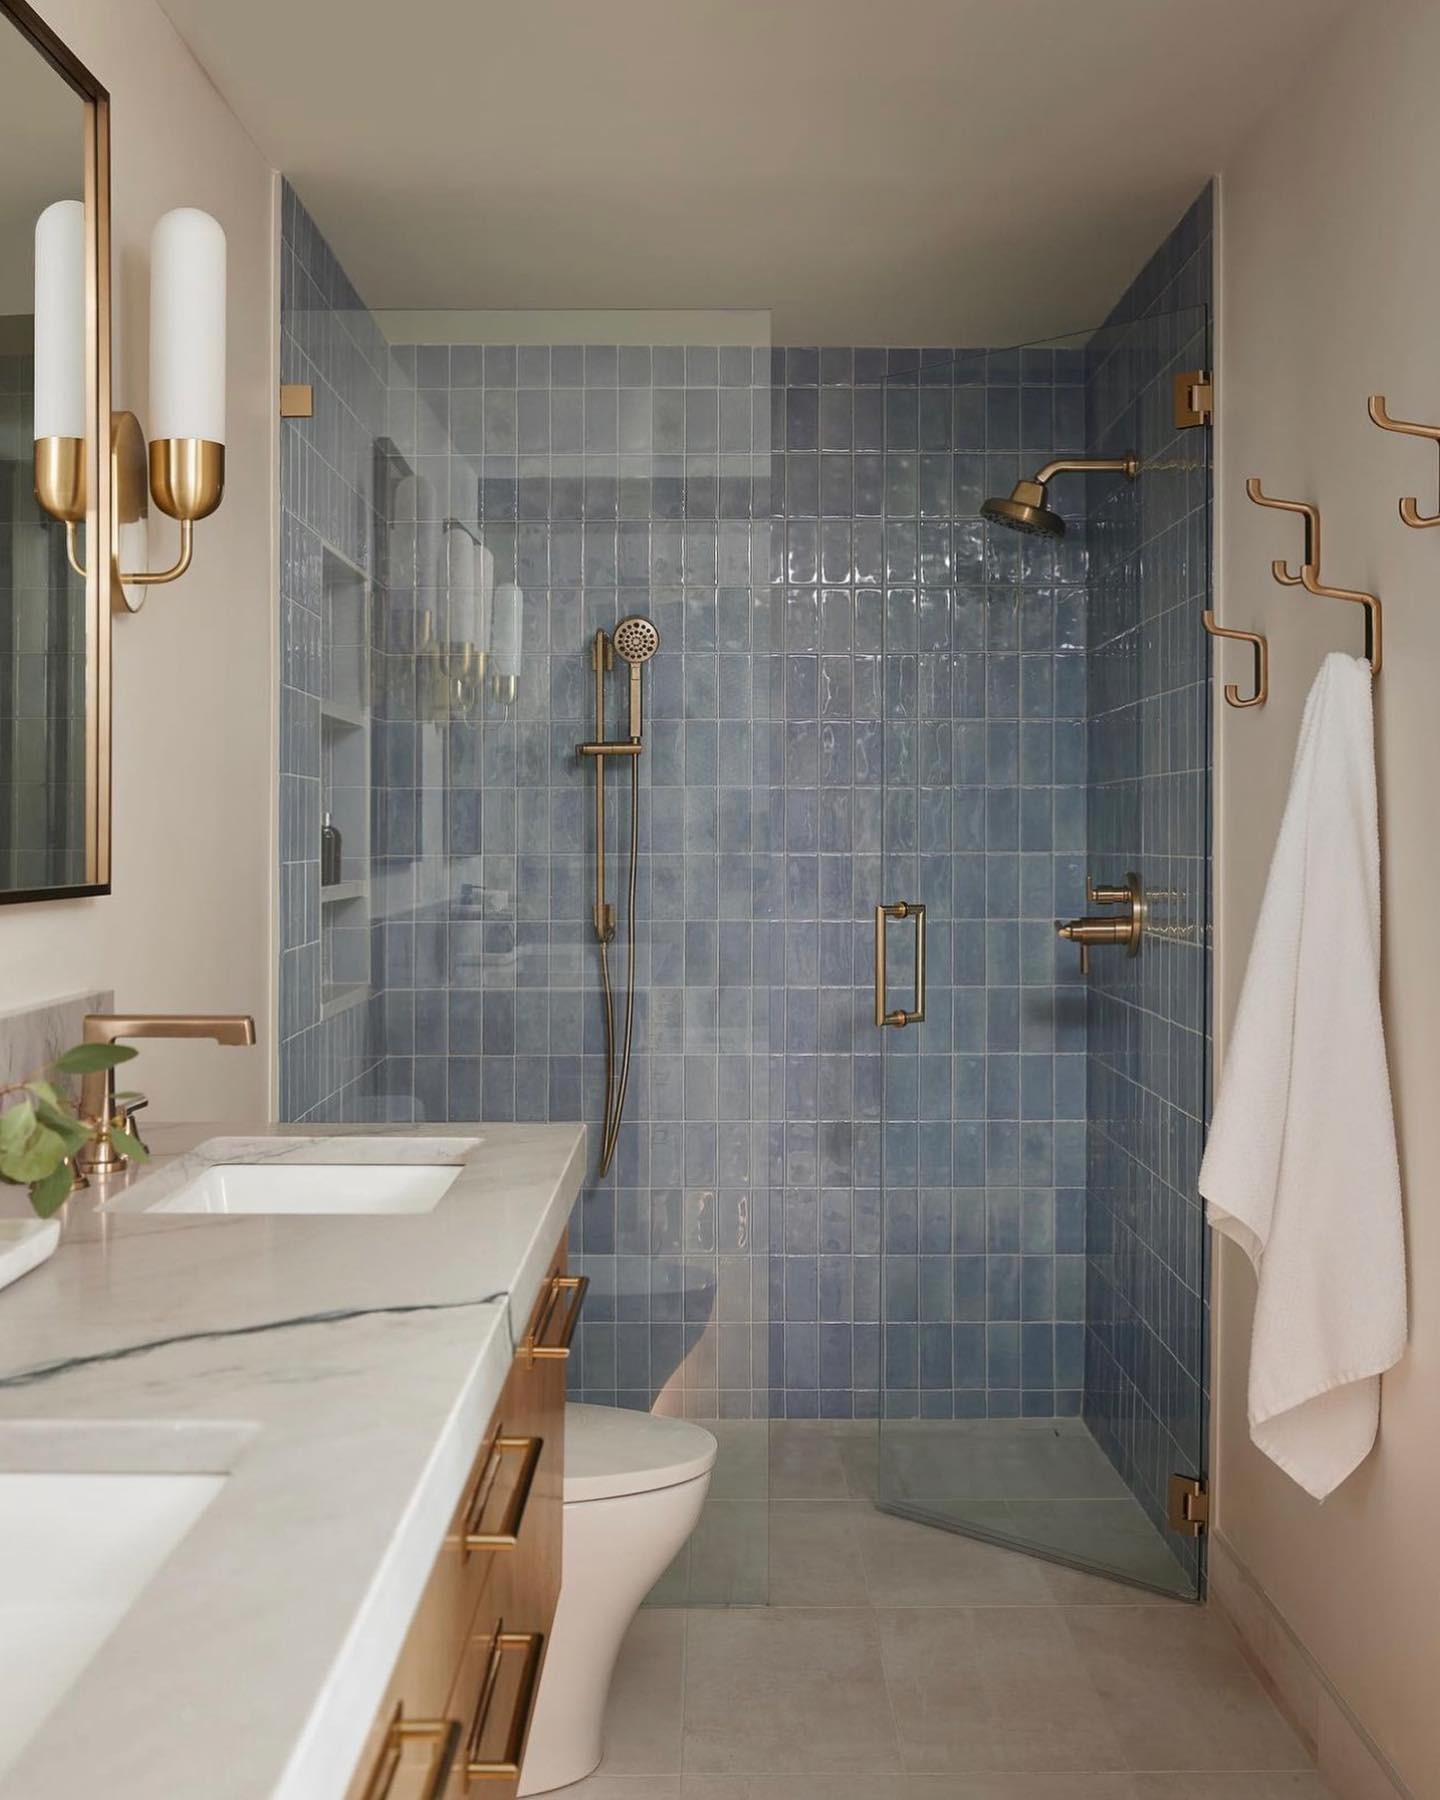 For Blue Bathroom Stylish Ways to Decorate your Bathroom in Blue Tones